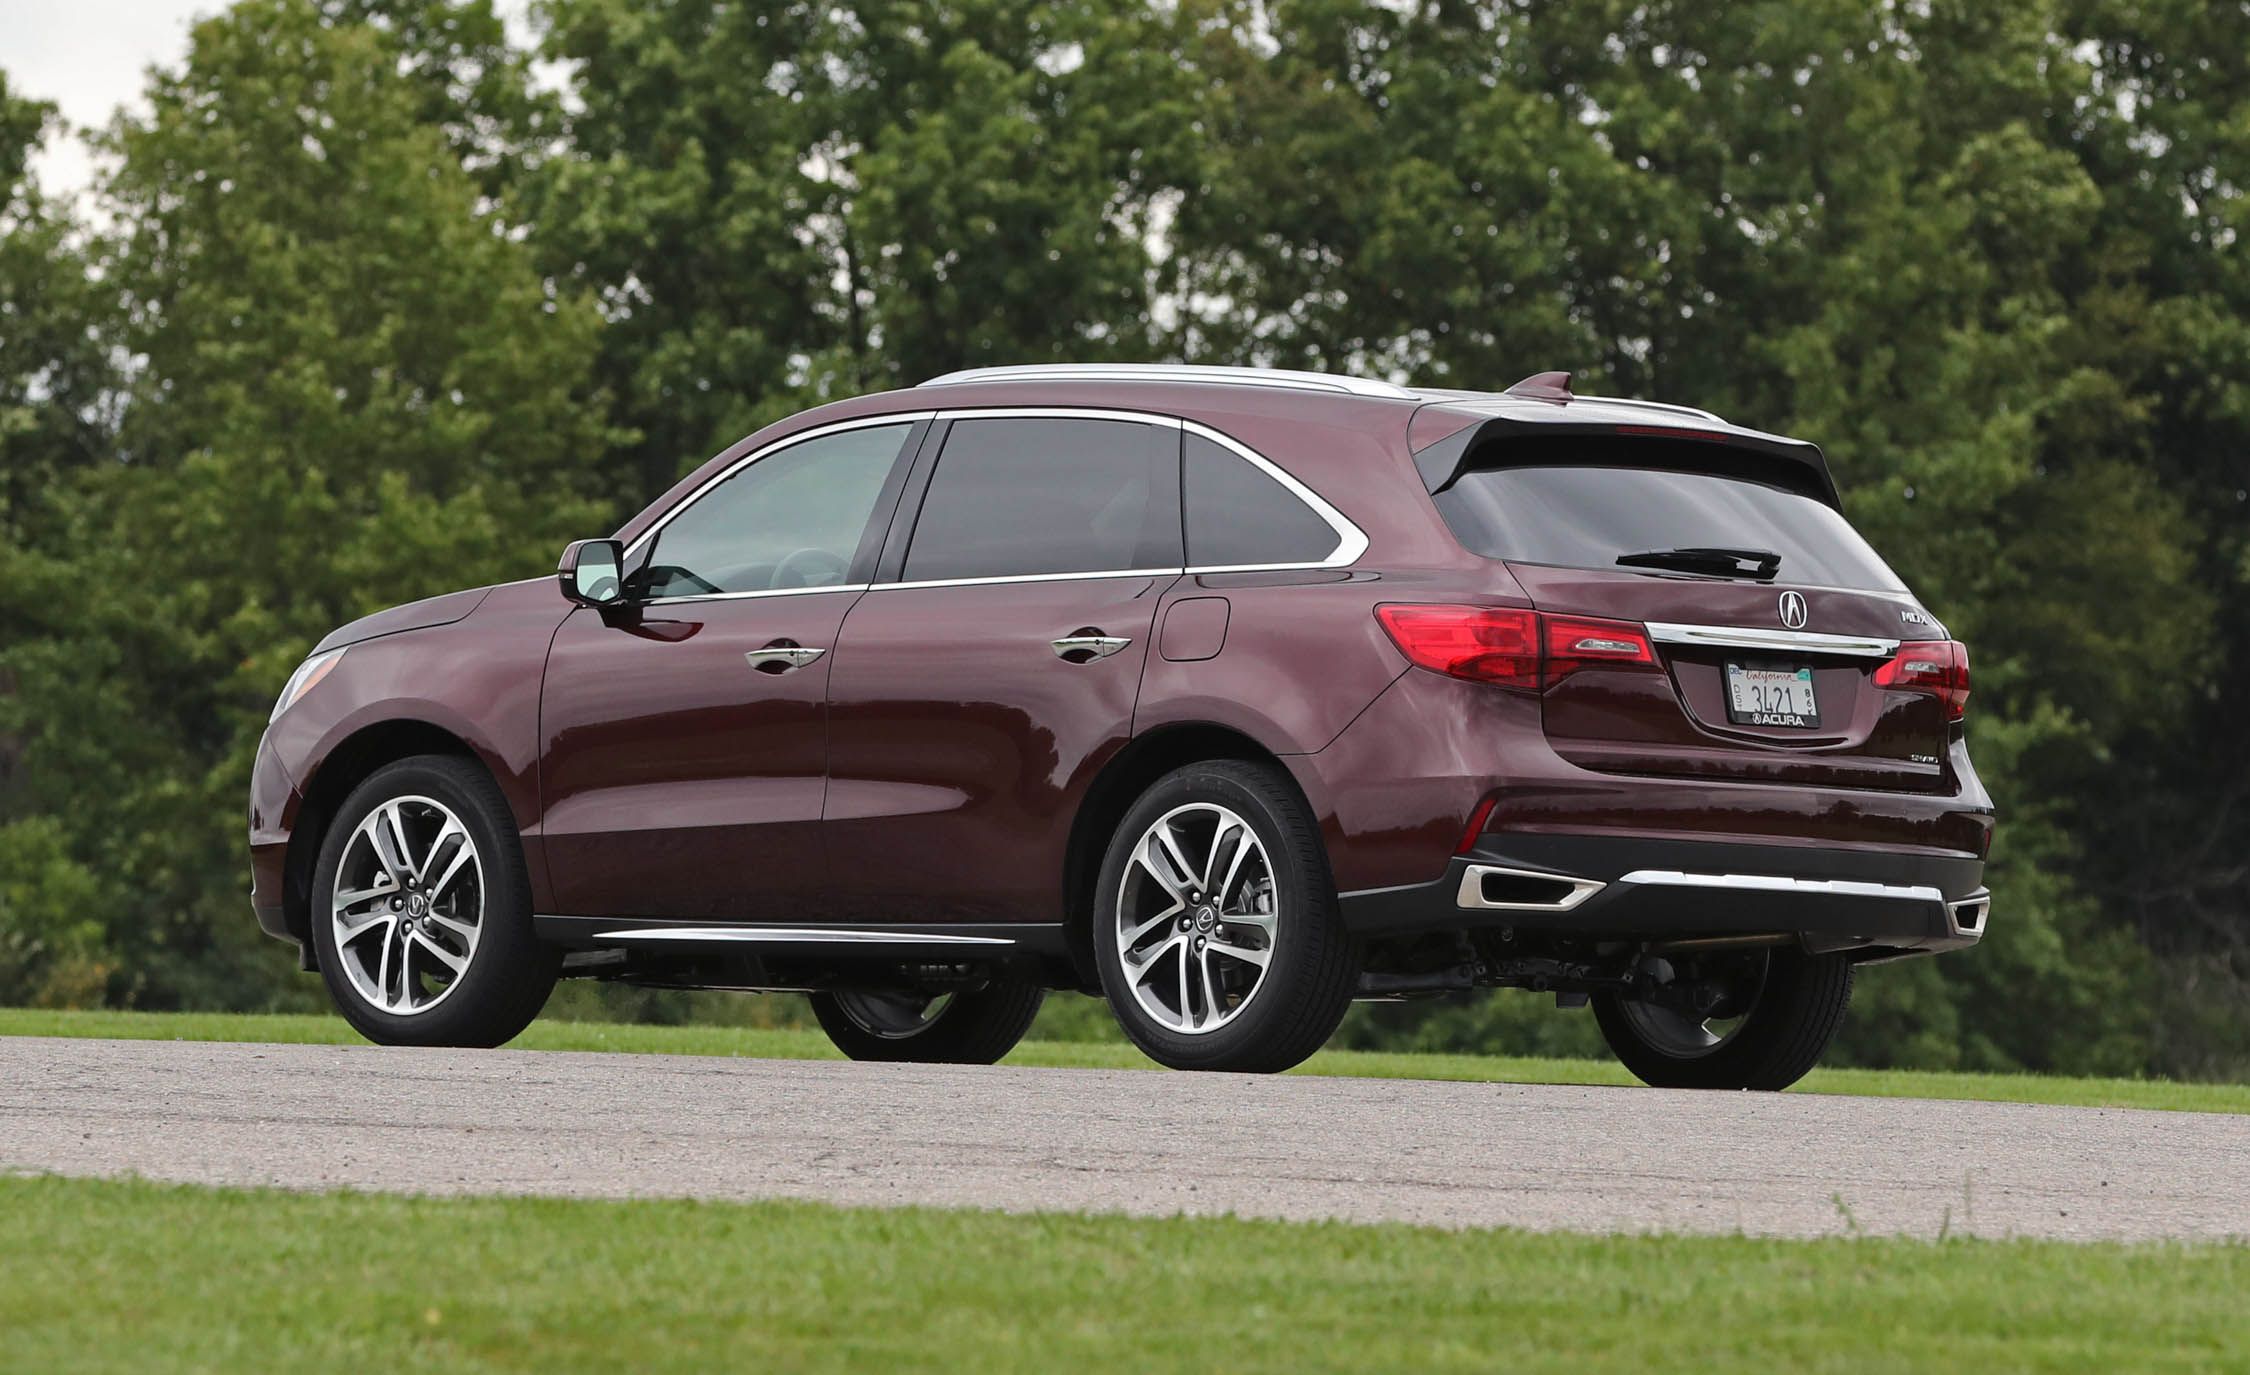 2017 Acura Mdx Exterior Rear And Side (View 16 of 22)